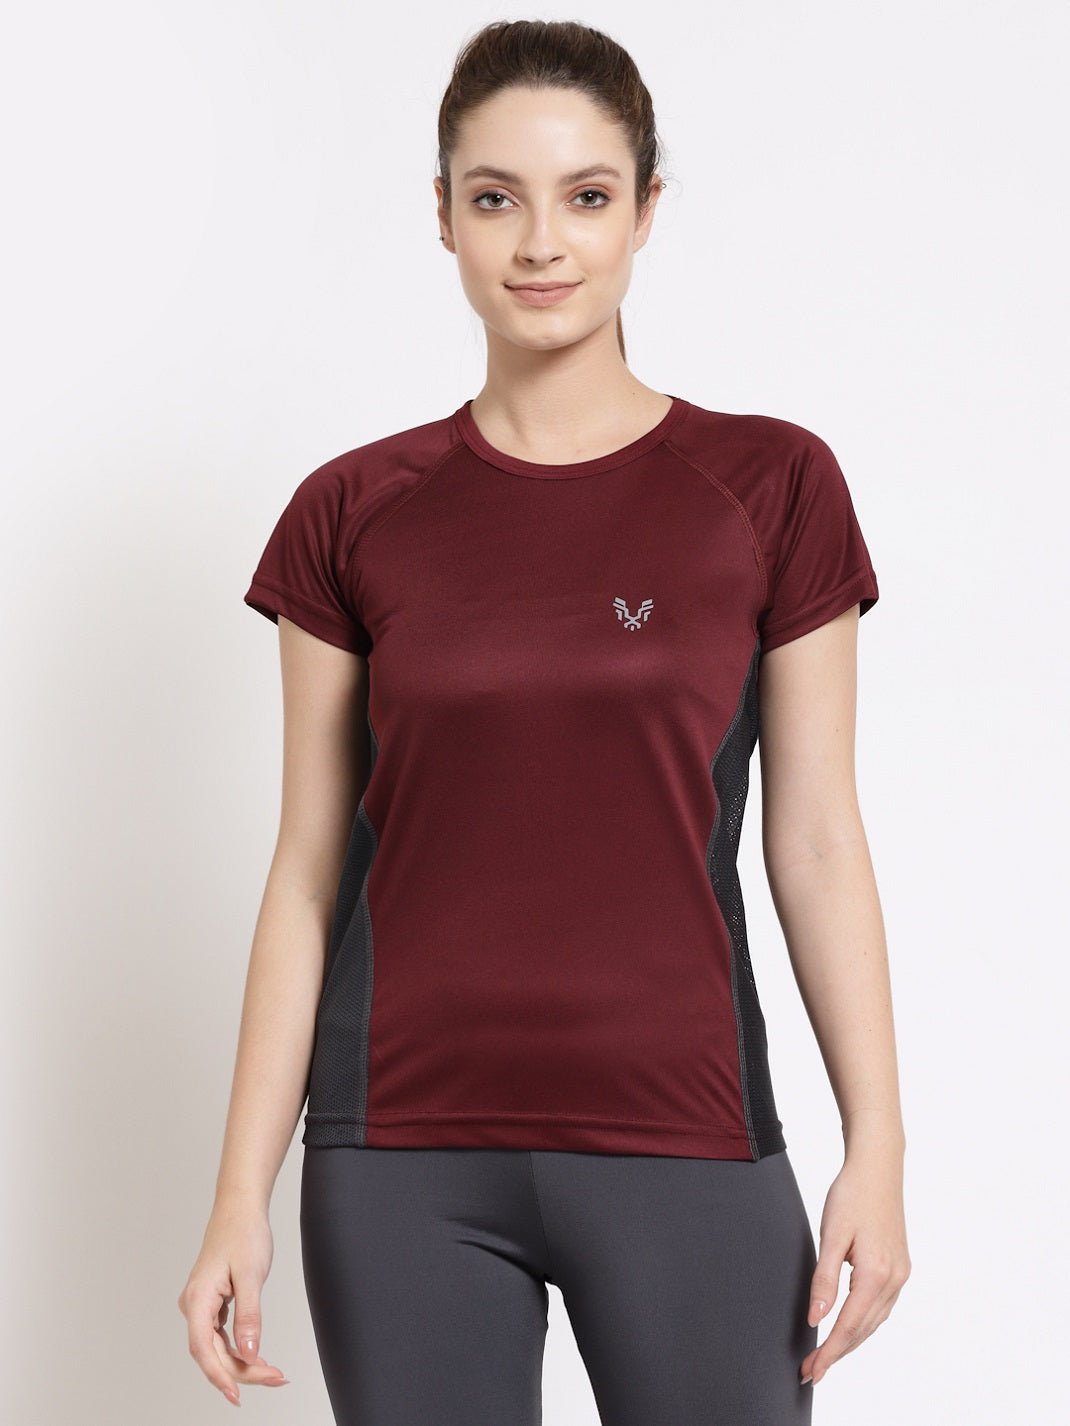 Workout tops & gym T-shirts for women